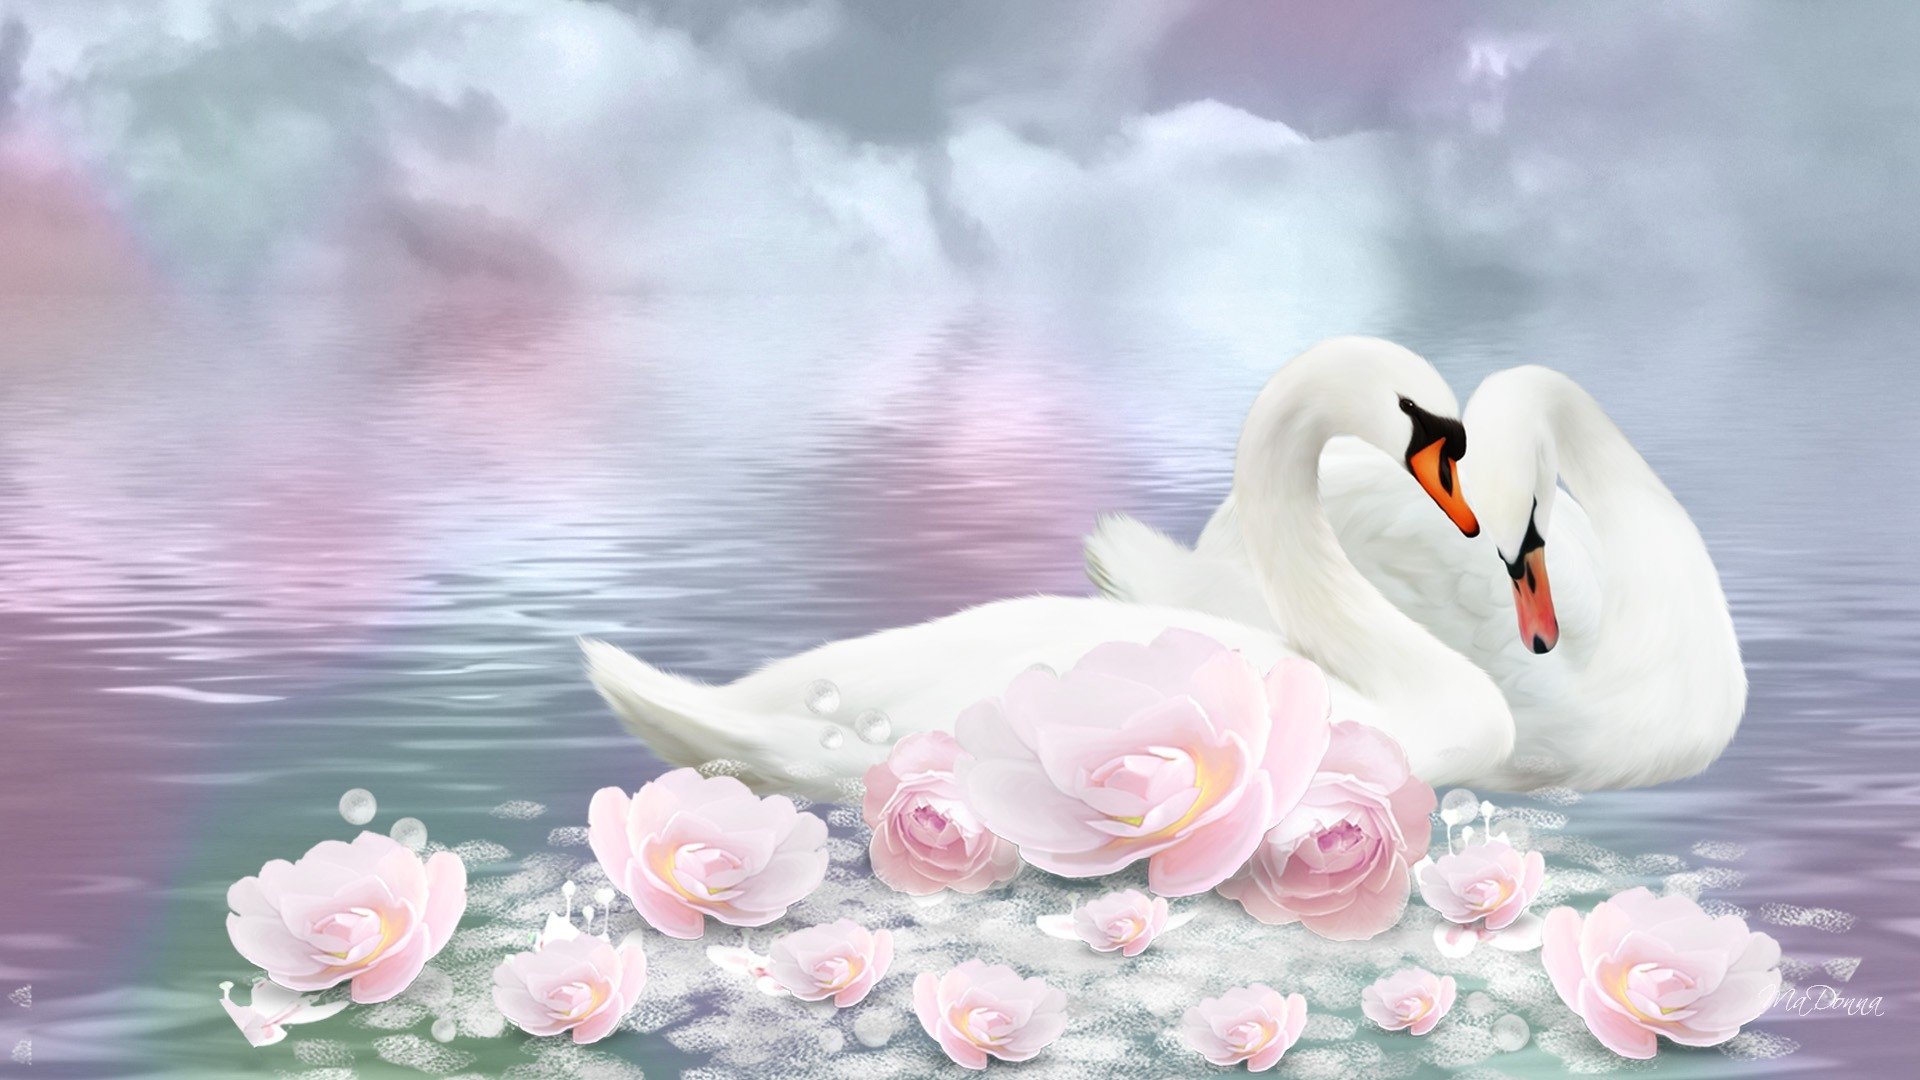 Swan Wallpapers and Background Images - stmed.net